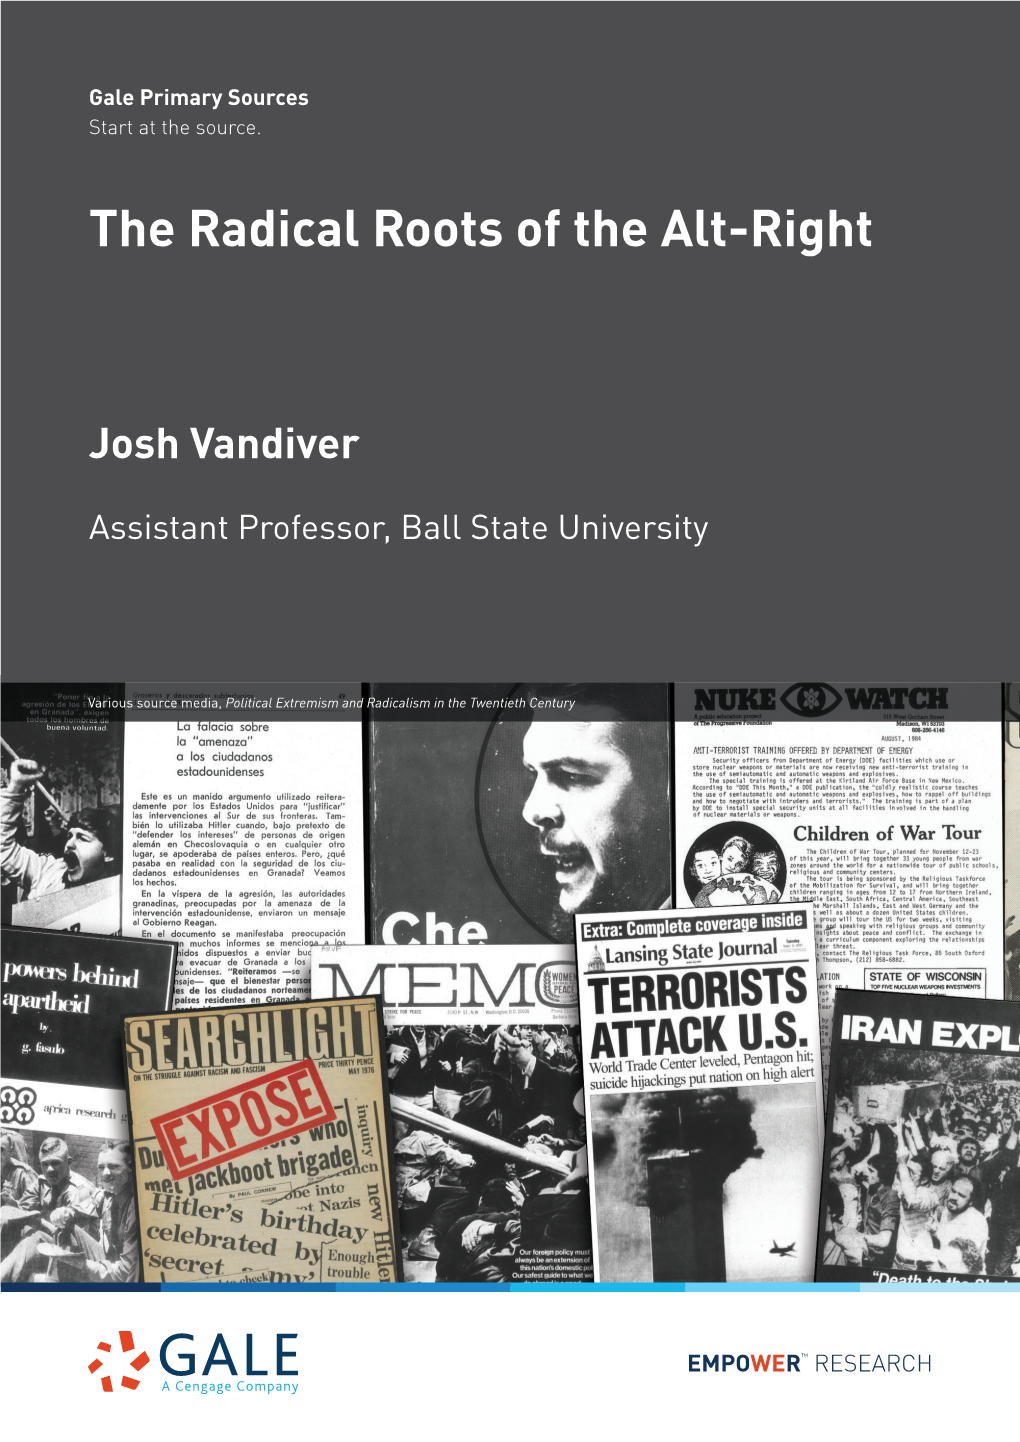 The Radical Roots of the Alt-Right